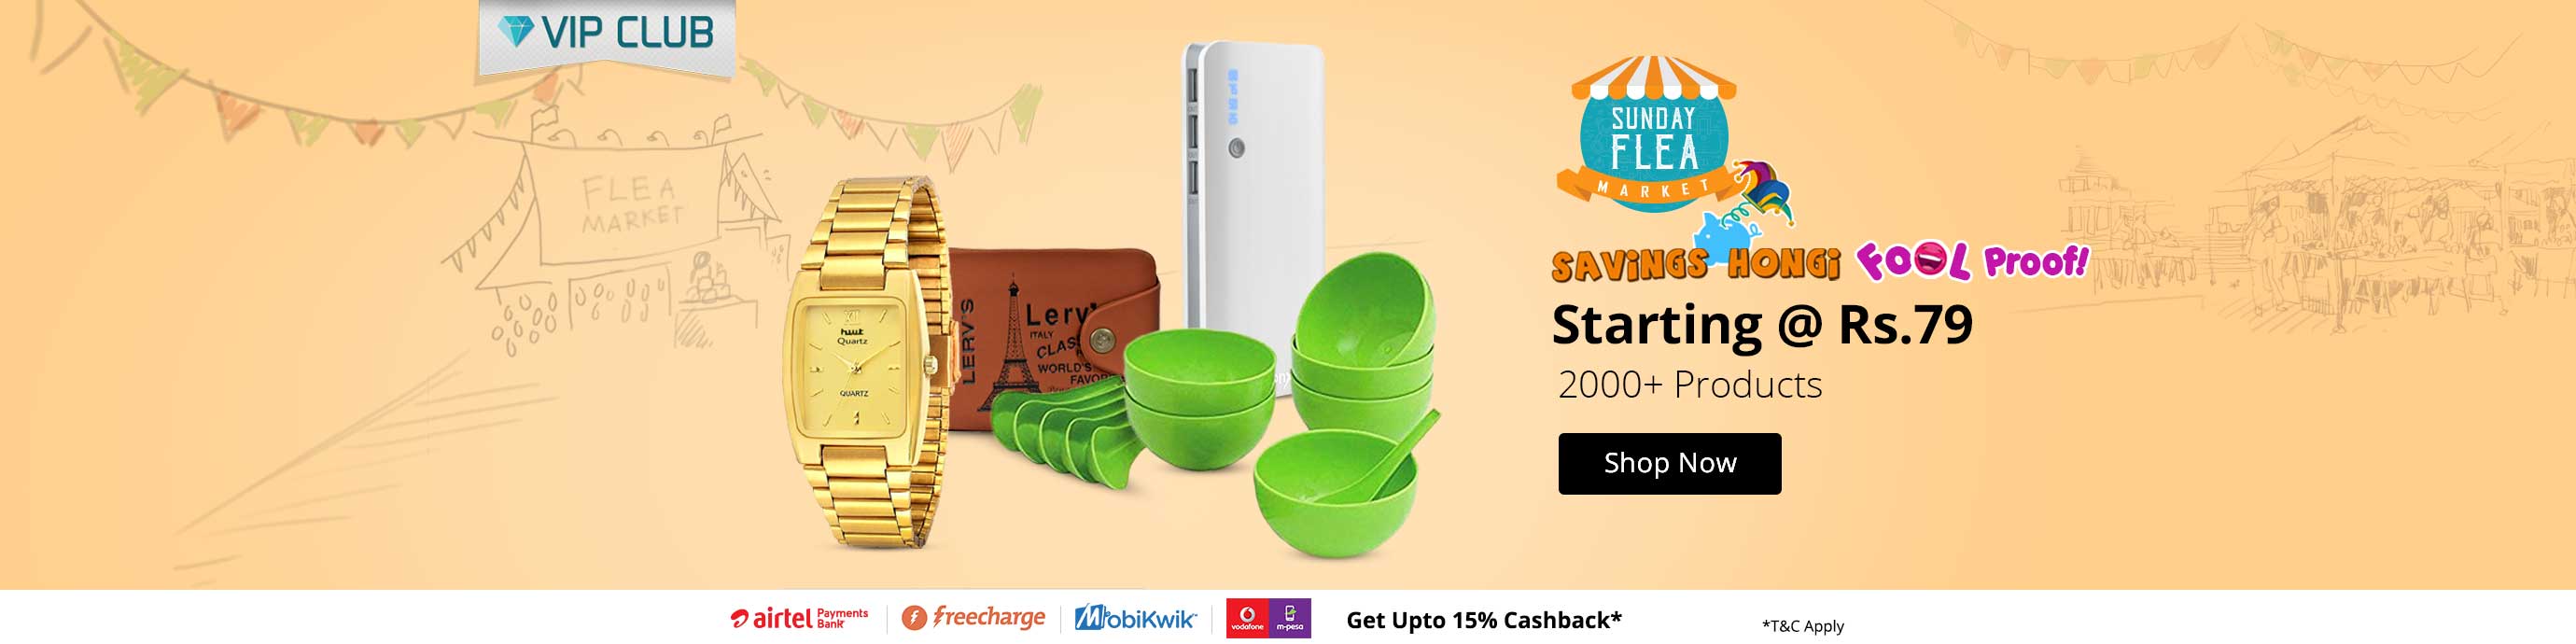 Sunday Flea Market - Starting Products Uptp 90% Discount + 15% Cashback with Freecharge Wallet 